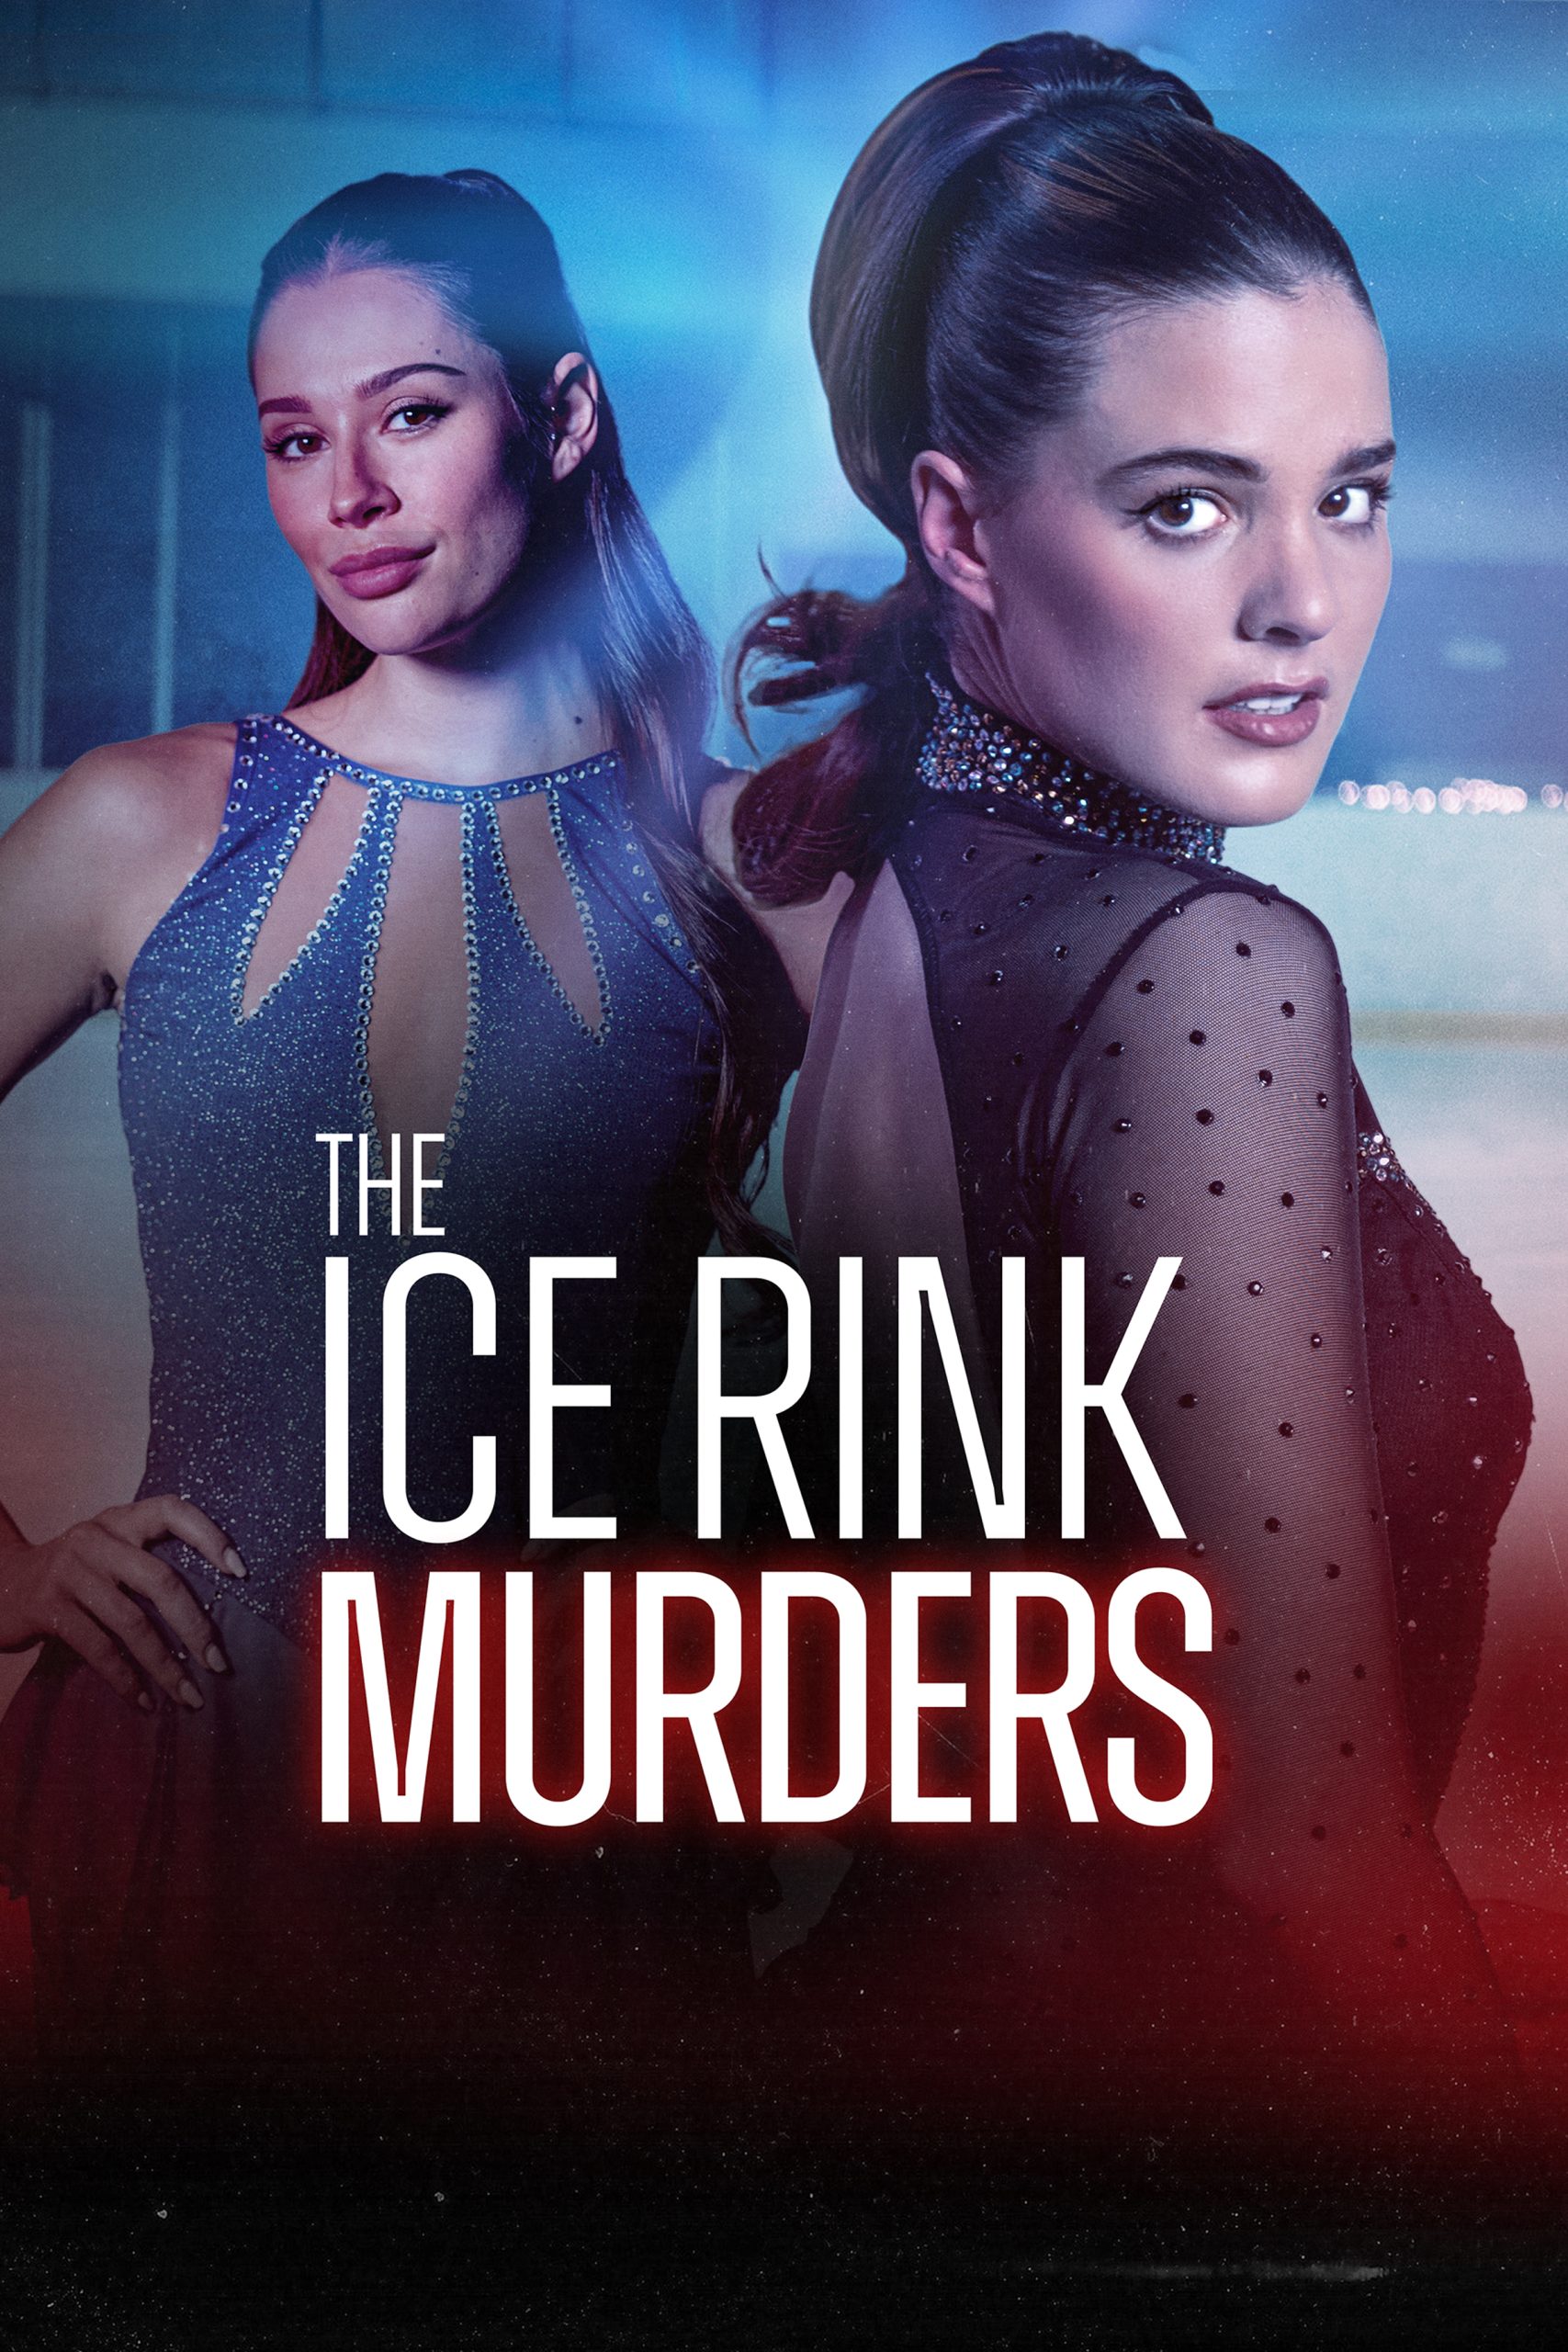 The Ice Rink Murders